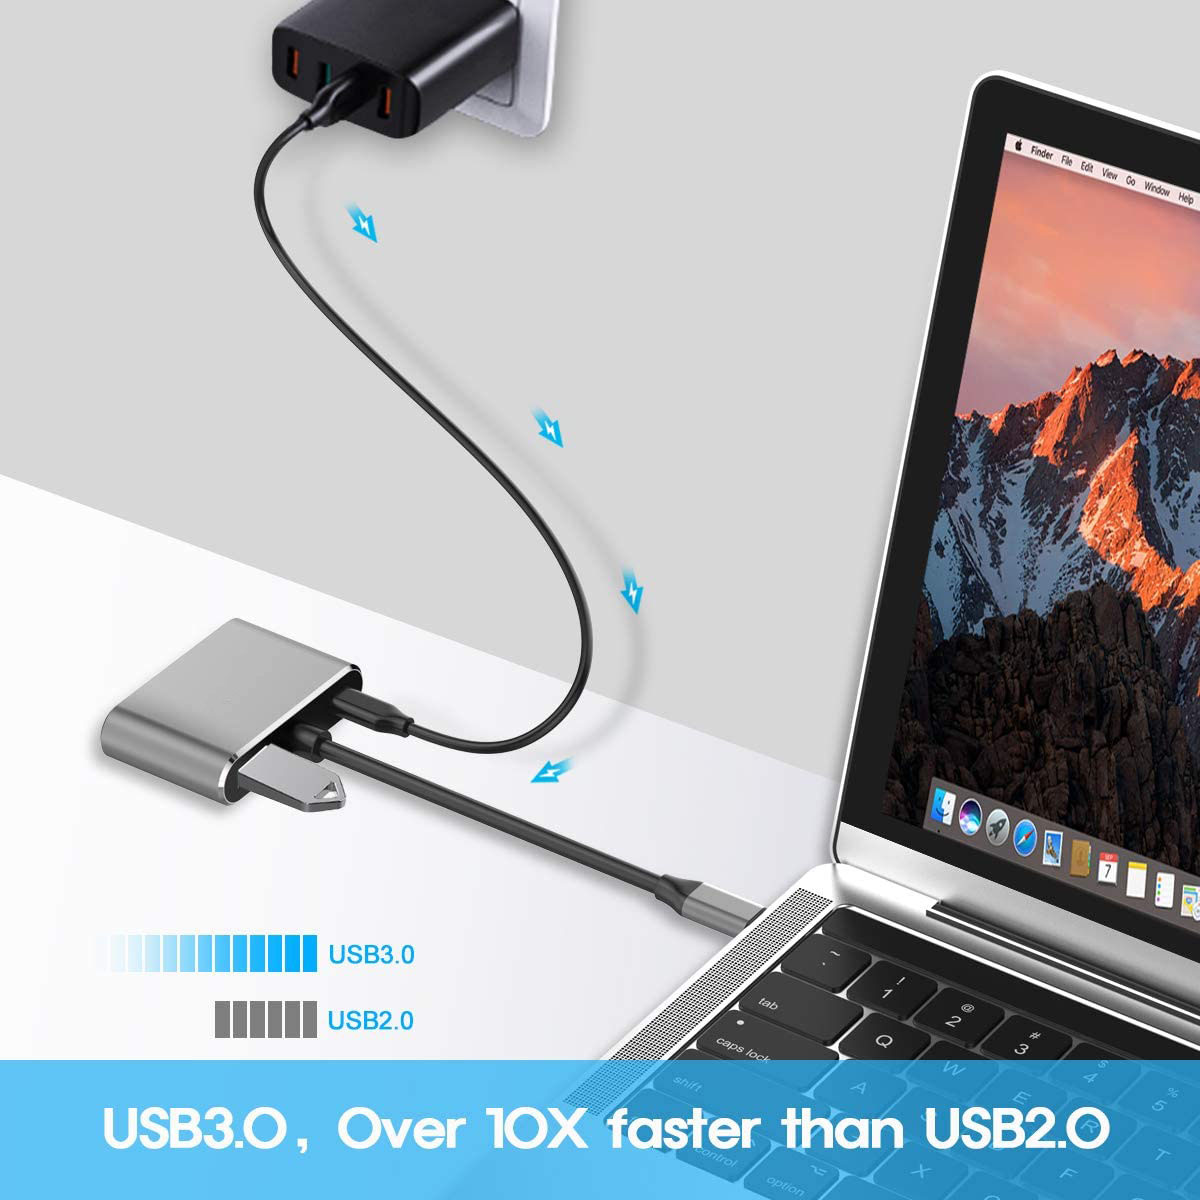 HF-UCA41: USB C to 4K HDMI VGA Adapter 4-in-1 Type C Hub with USB 3.0 Charging Power PD Port Compatible for Nintendo Switch/MacBook Pro/iPad Pro/Samsung Galaxy/Dell XPS - Click Image to Close